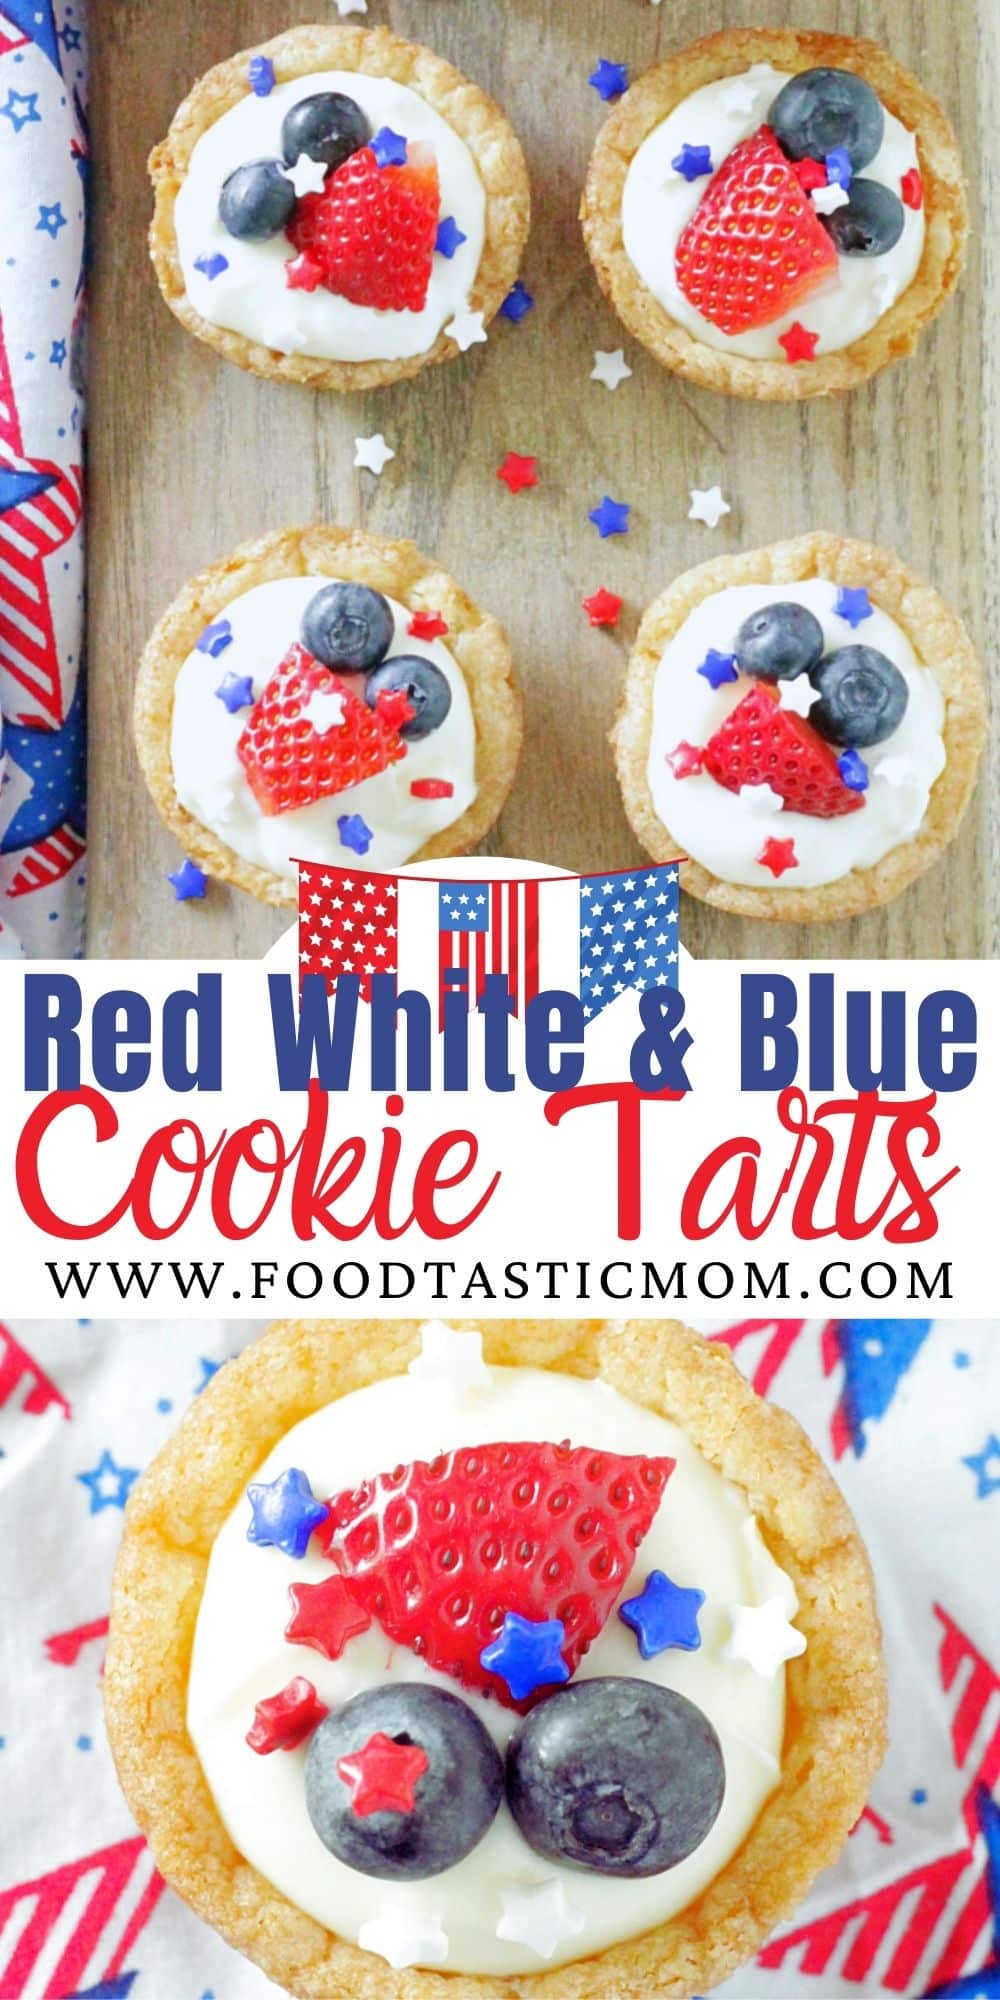 These red white and blue cookie tarts use store-bought cookie dough for an easy and patriotic dessert. via @foodtasticmom